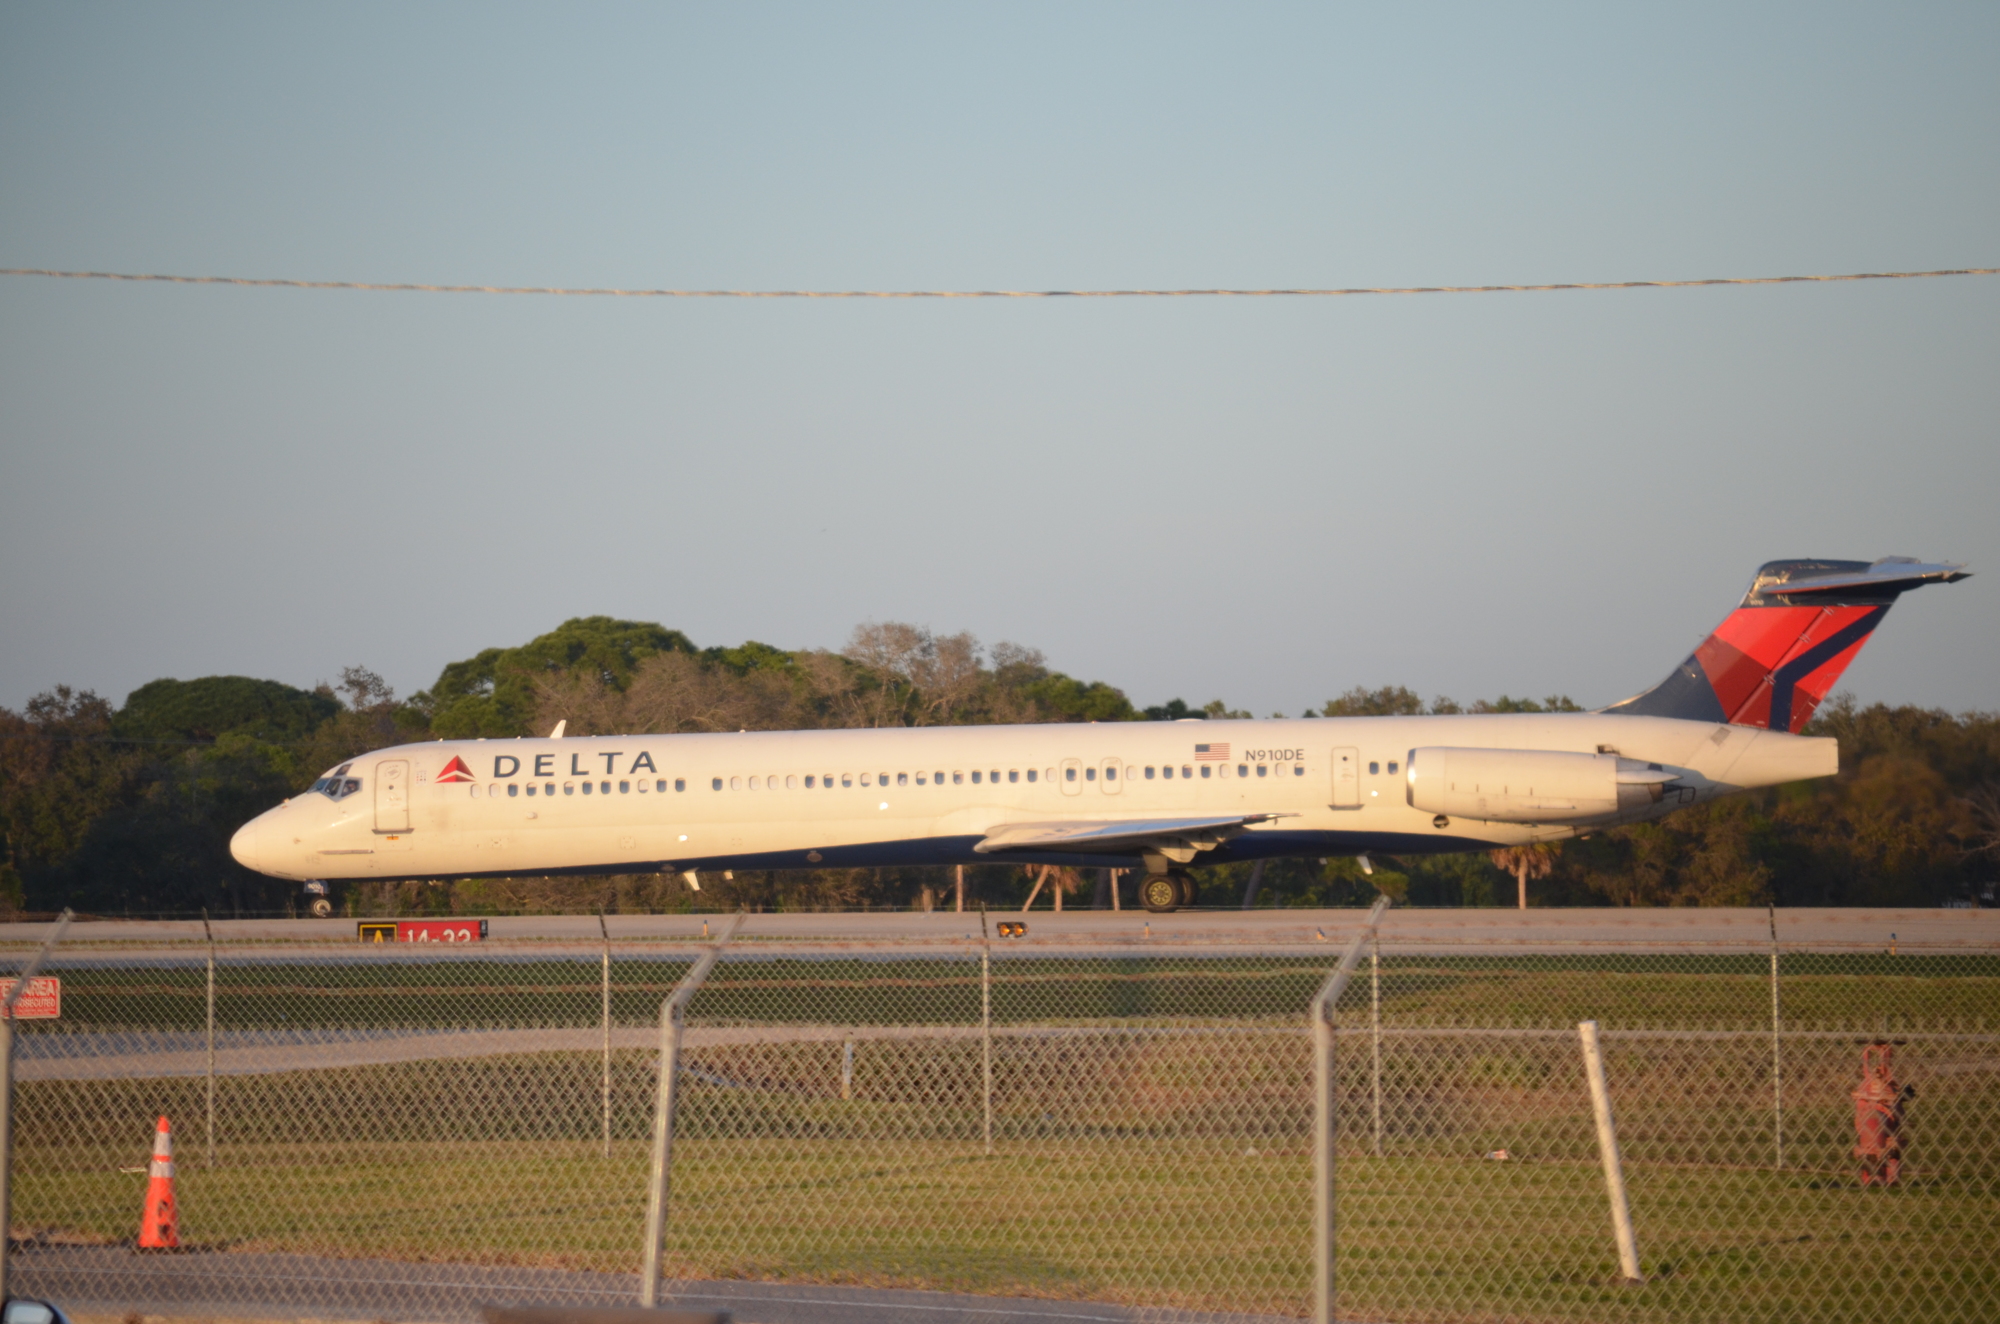 Nat took longer to get to SRQ than this Delta Air Lines jet took to get from Atlanta to Sarasota.